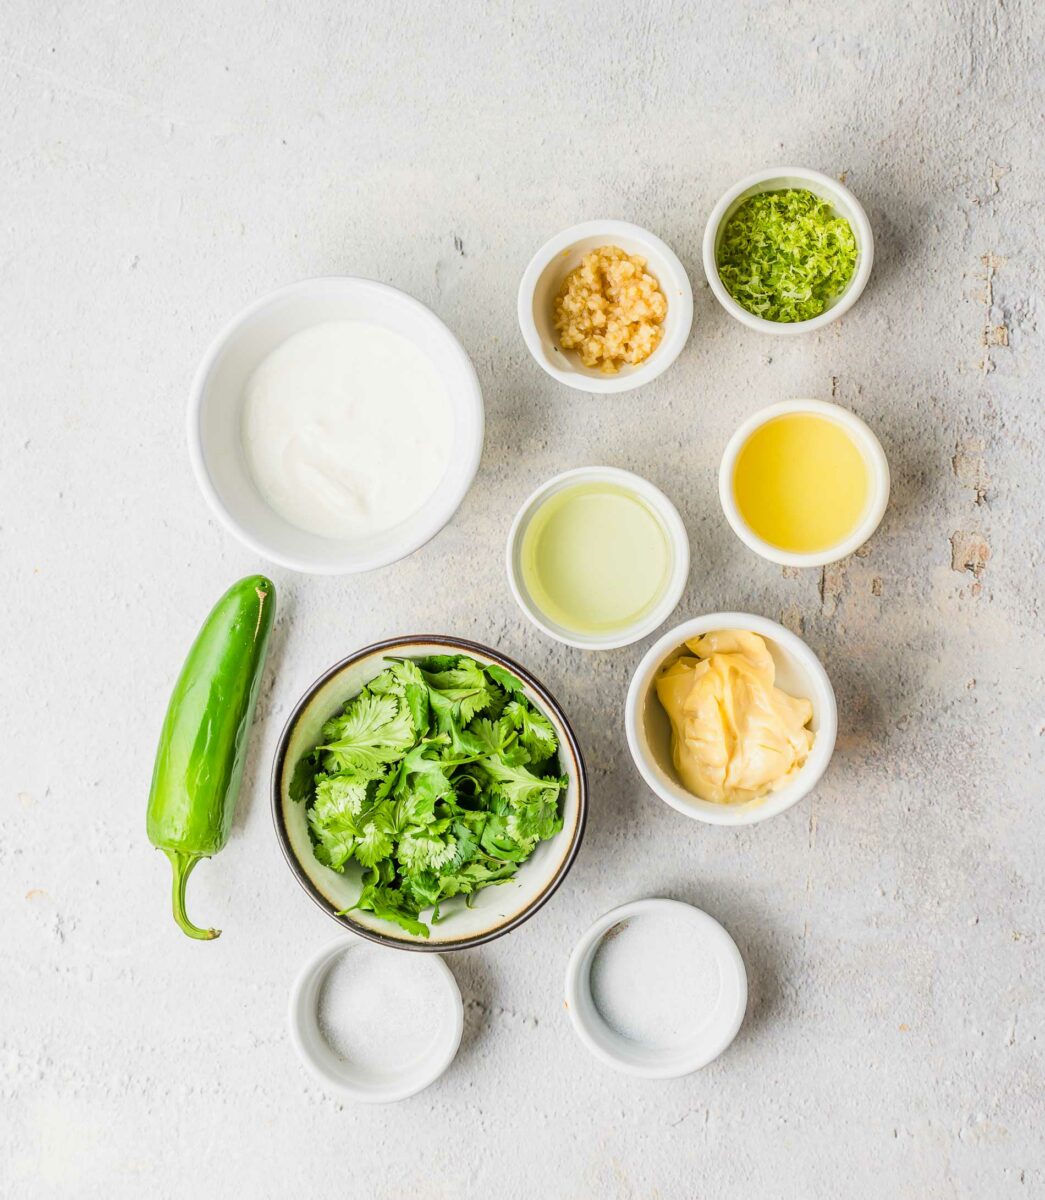 The ingredients for creamy cilantro dressing are placed on a white surface. 